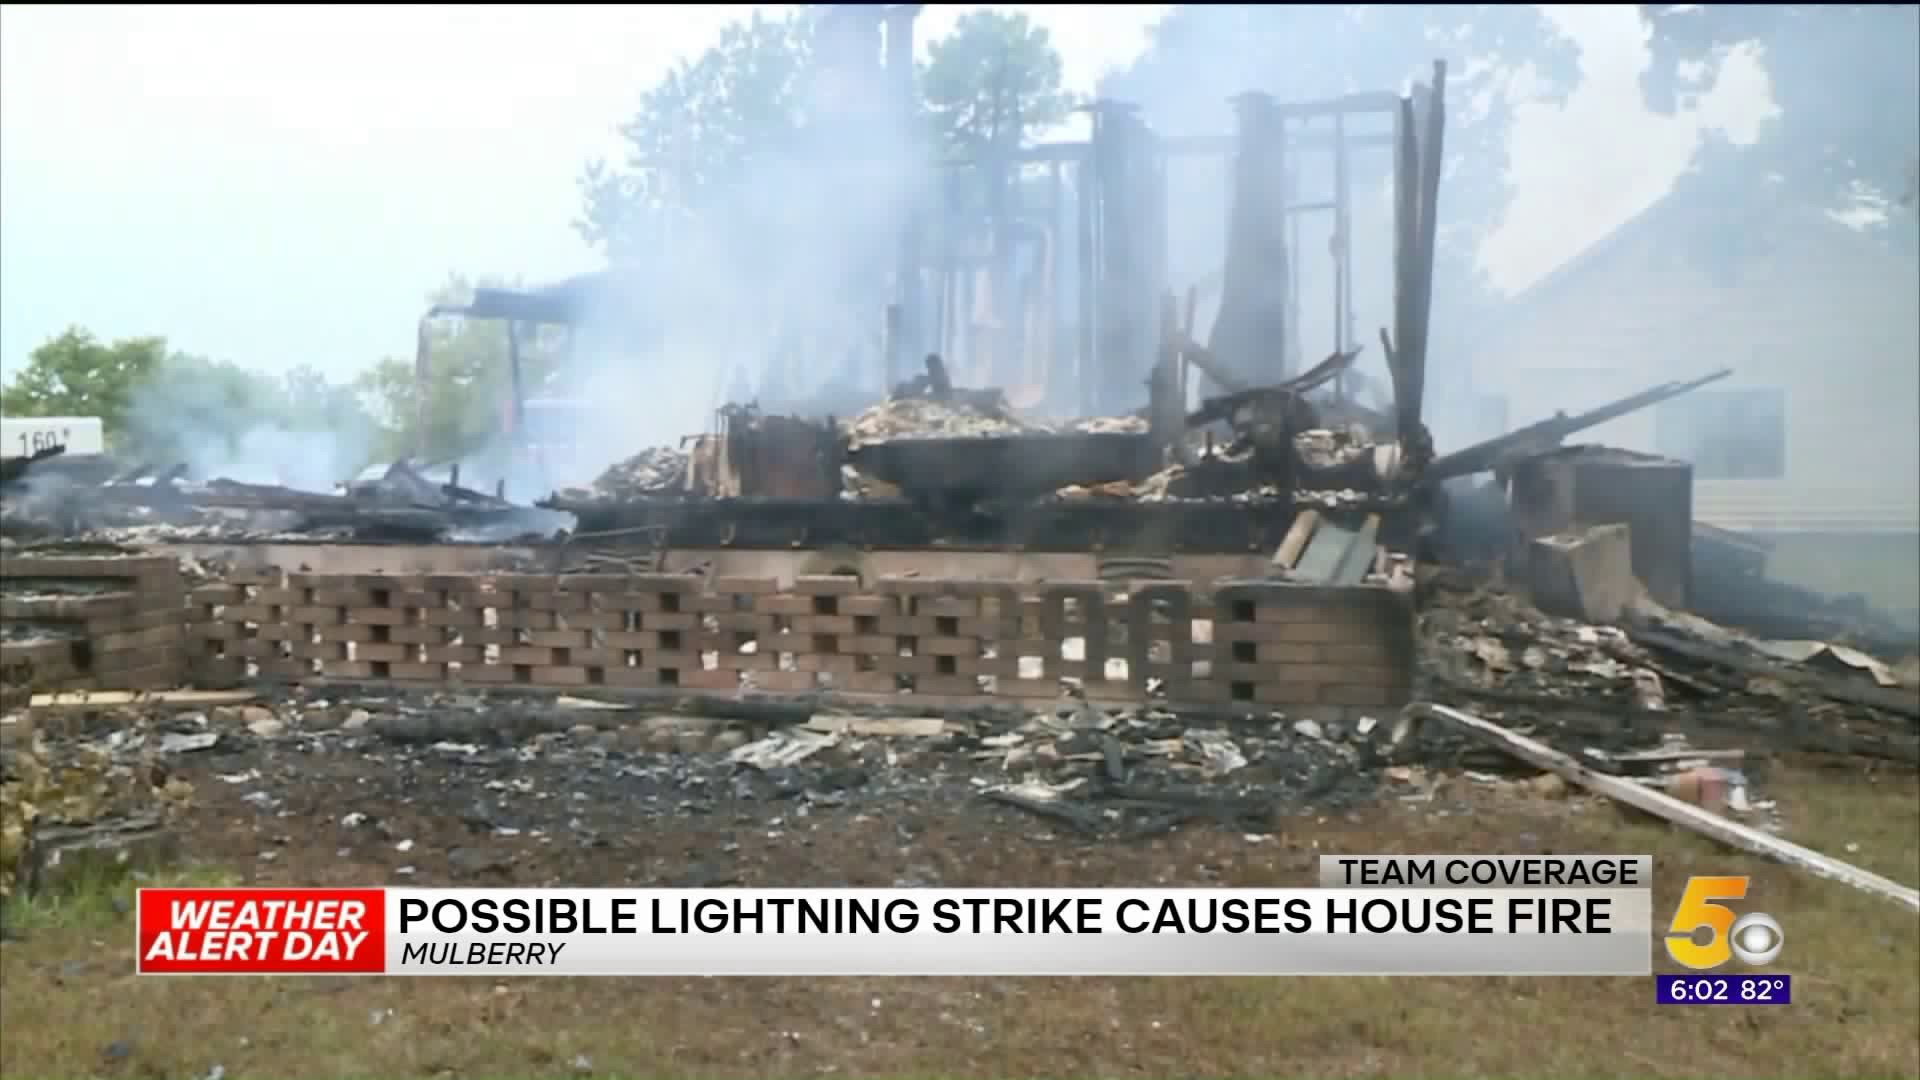 Possible Lightning Strike Causes House Fire